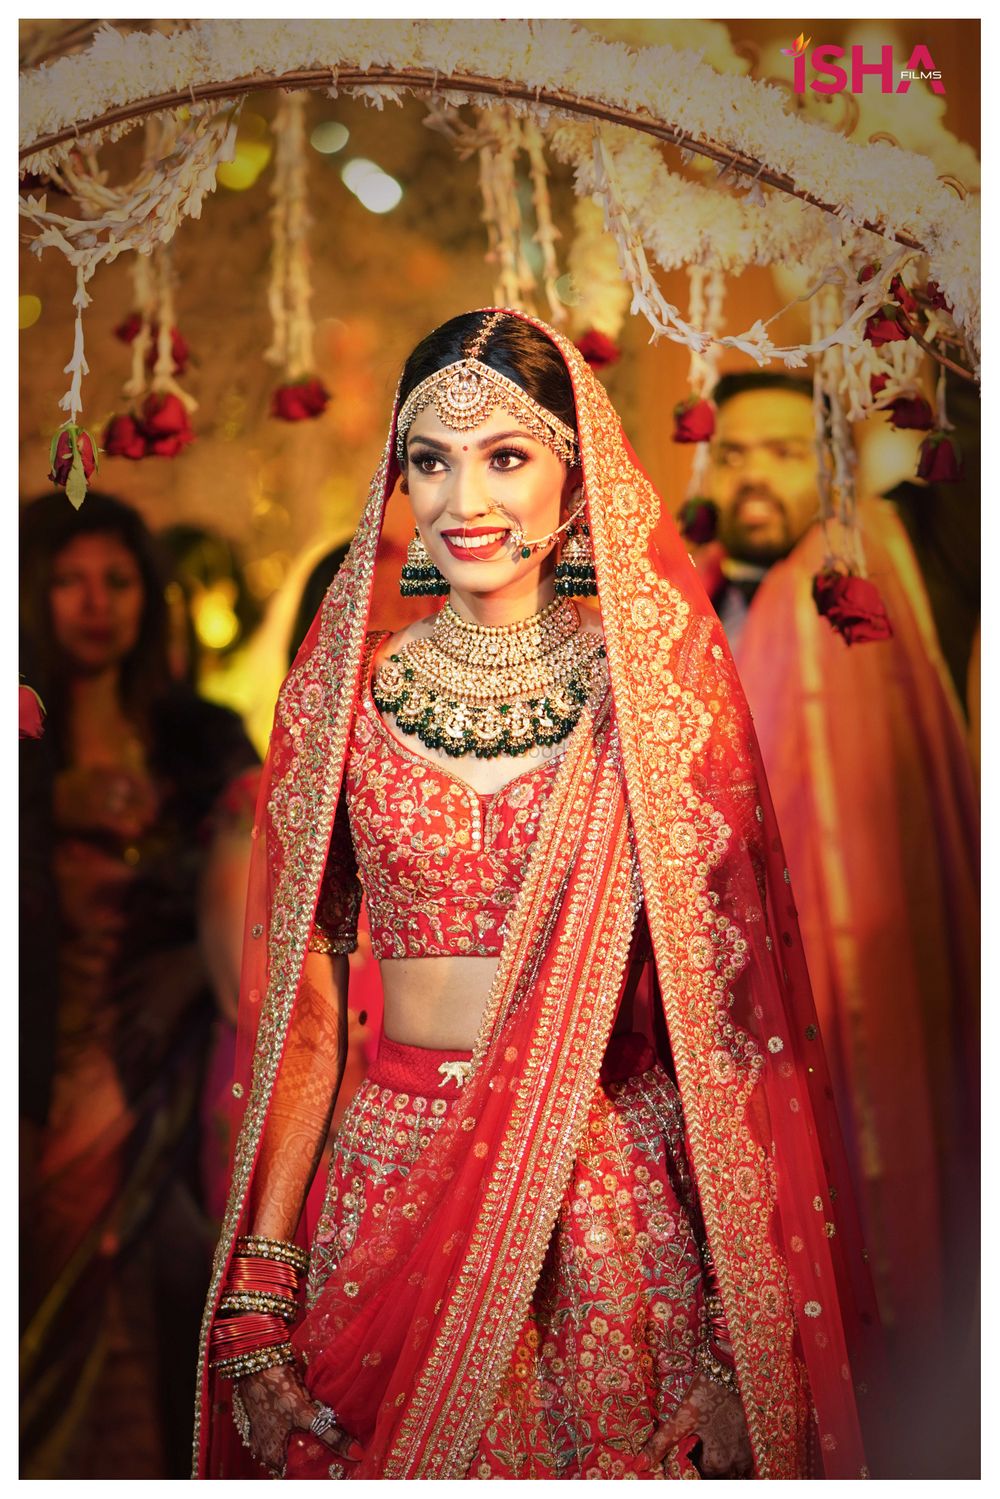 Photo of bride entering in a red lehenga with green jewellery